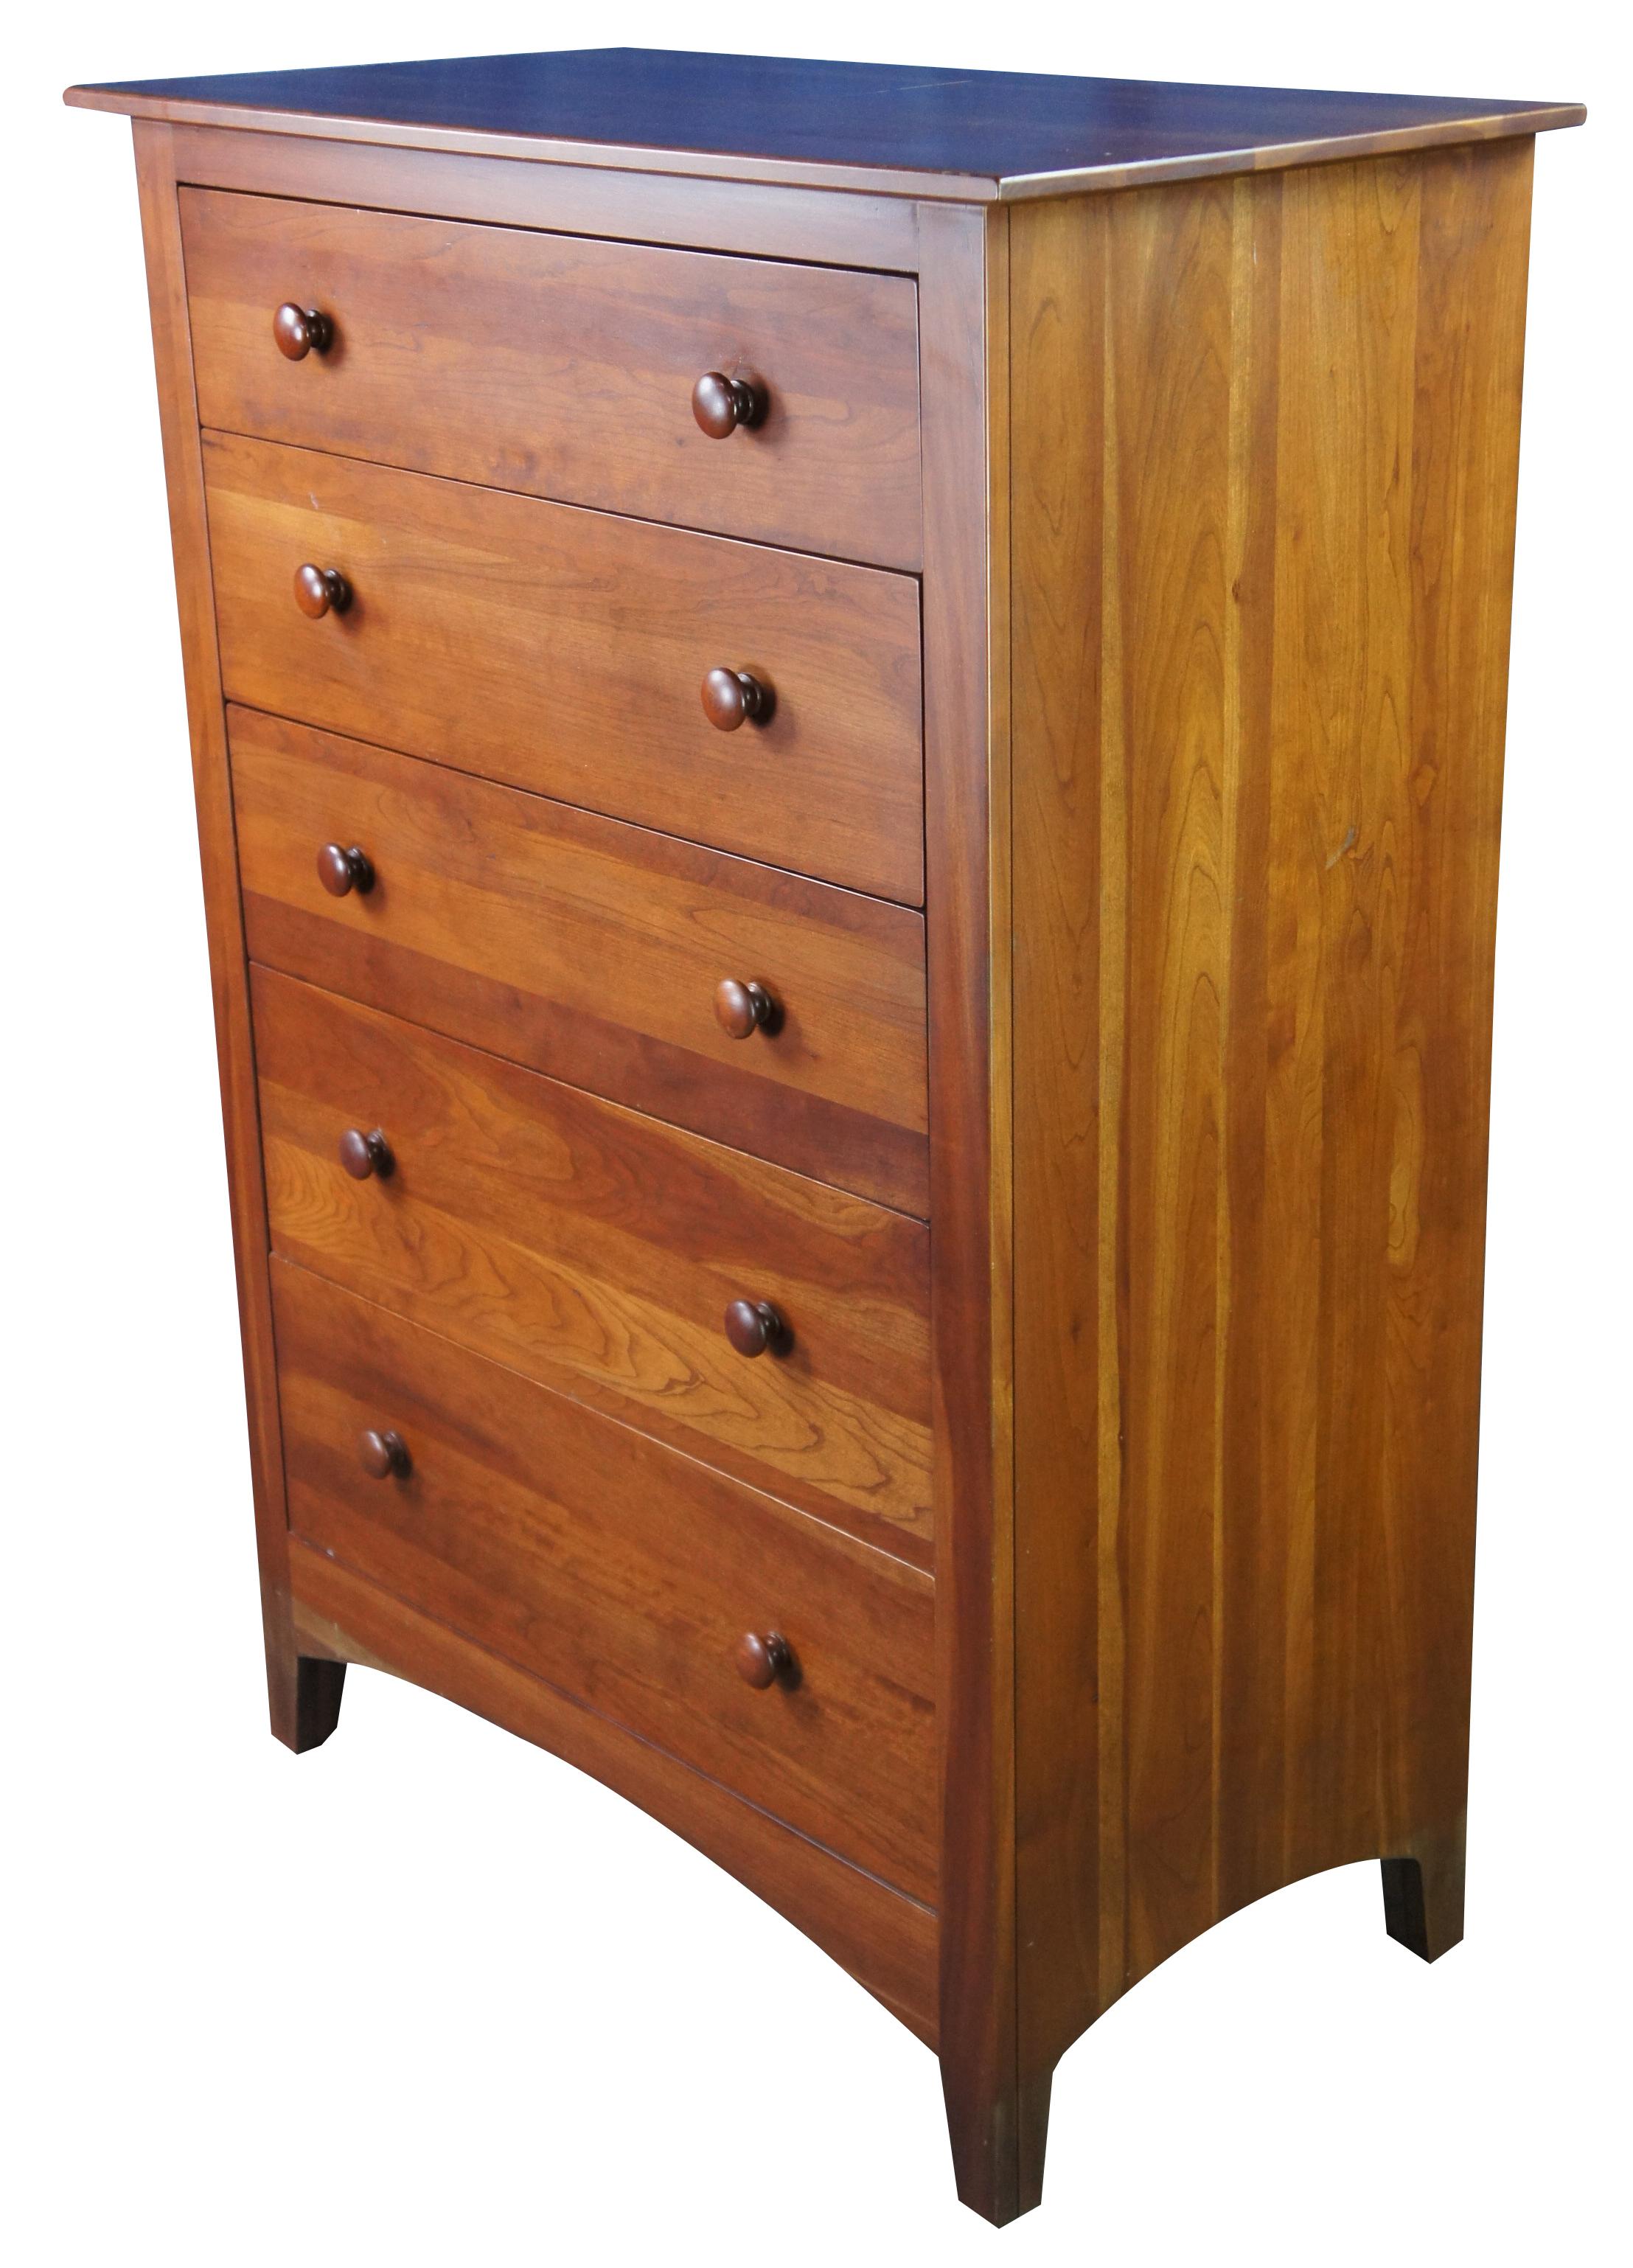 Vintage Ethan Allen American impressions cherry tallboy chest of drawers or dresser featuring five drawers. Made in March of 1993, 24-2425.
     